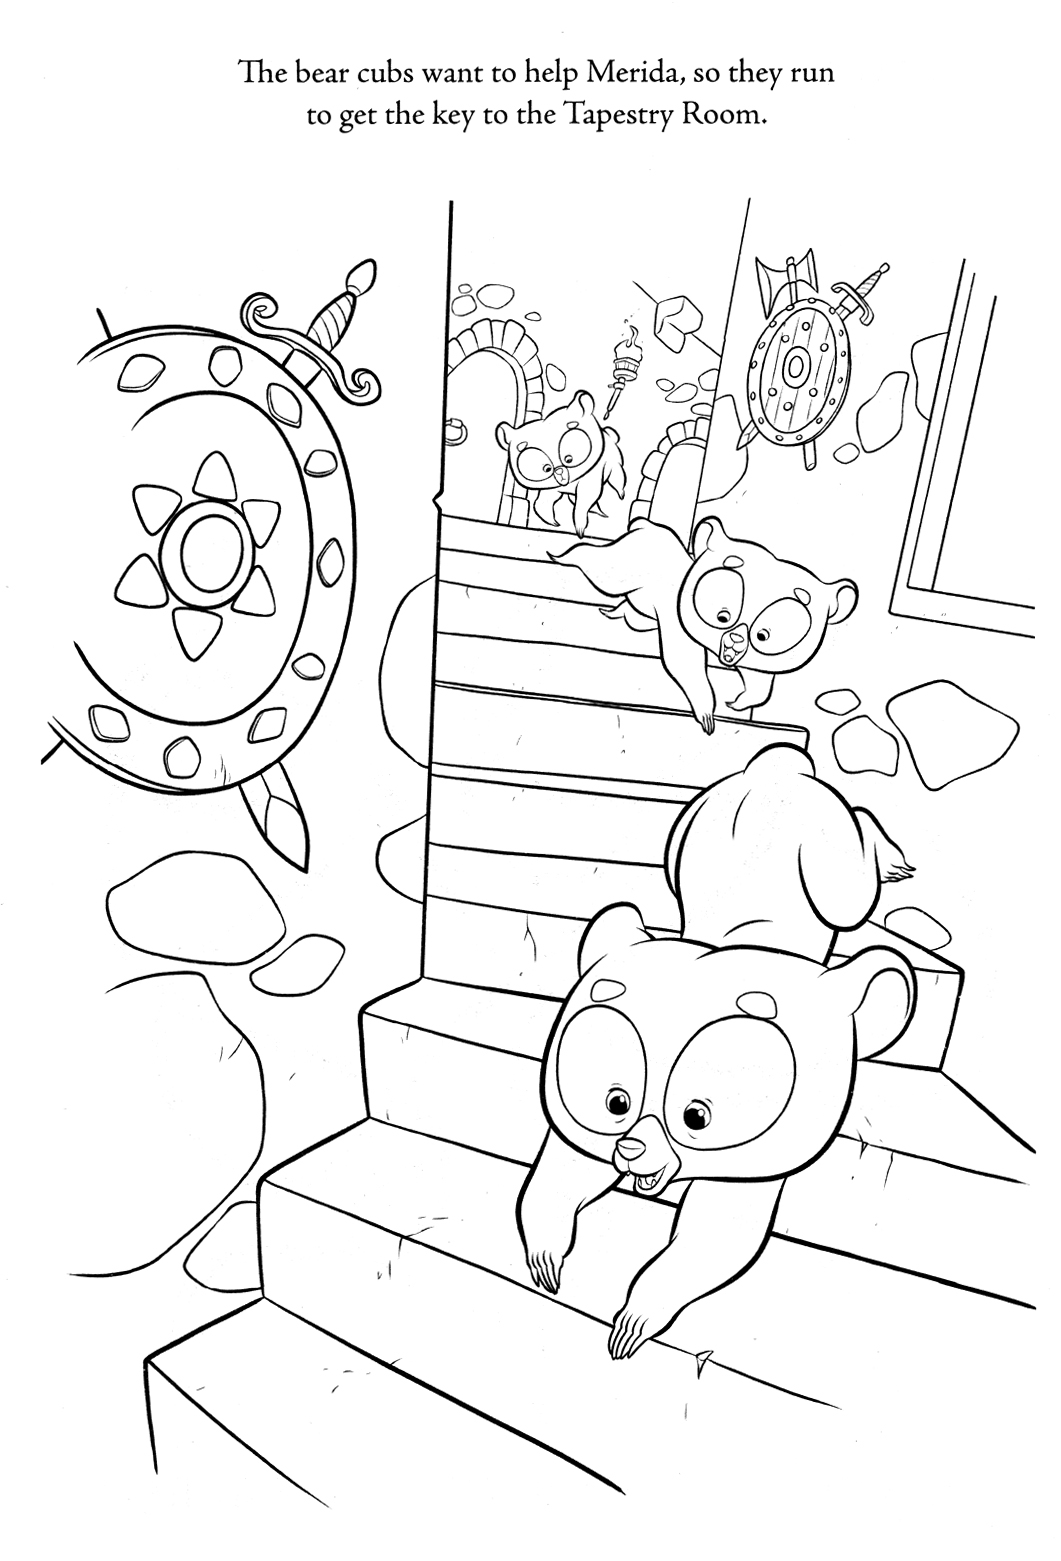 Braves – brother bears Coloring Page